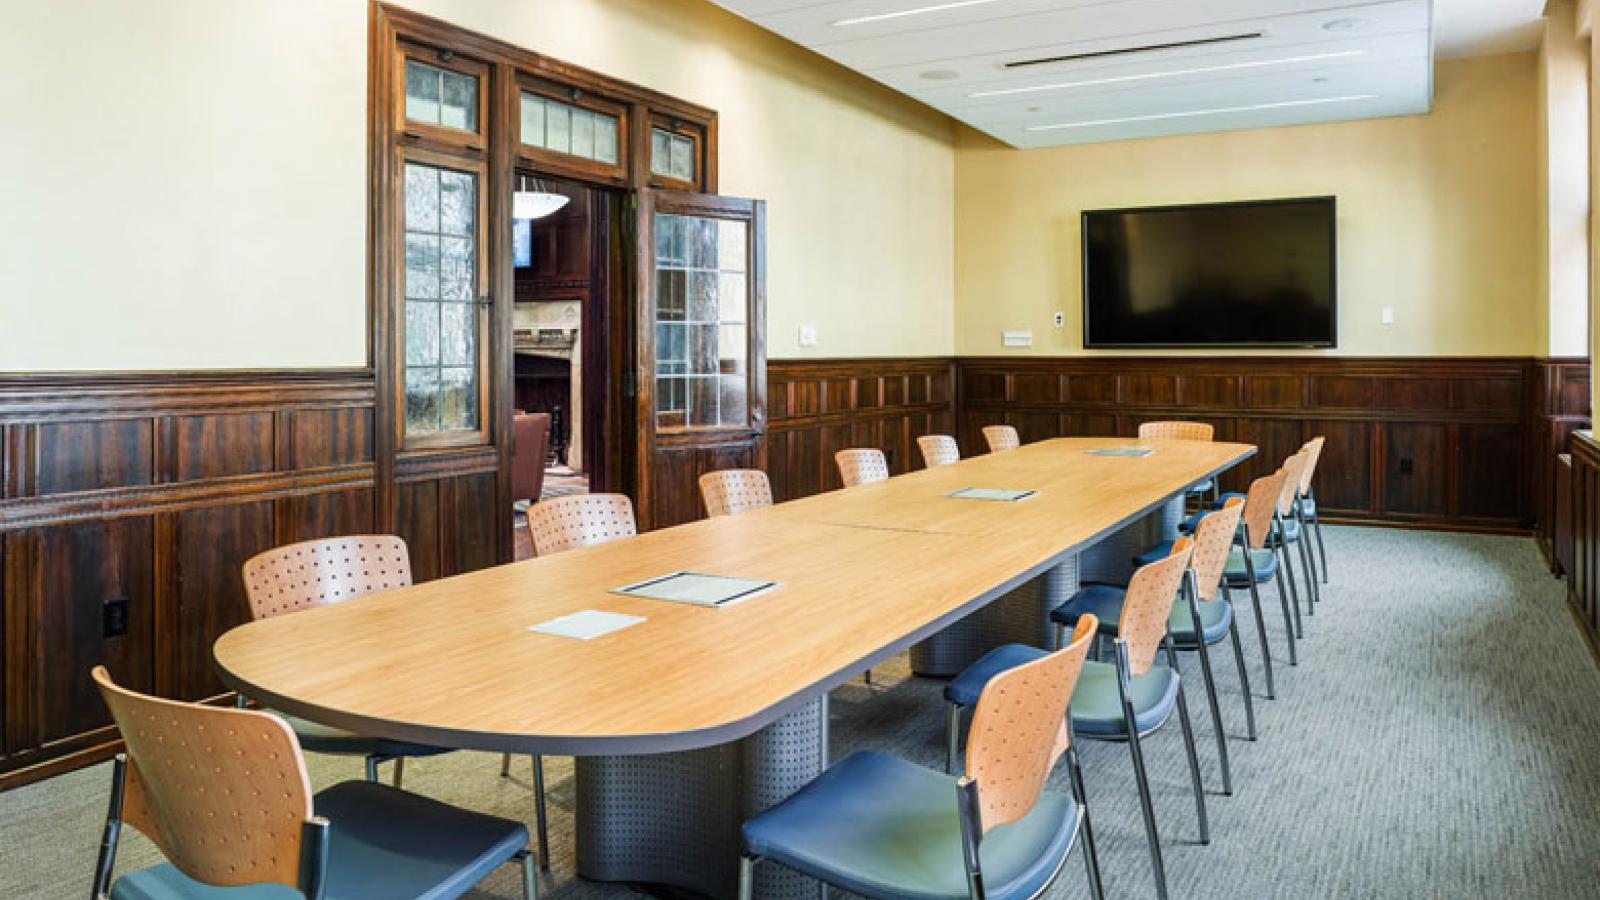 The ARCH Conference Room